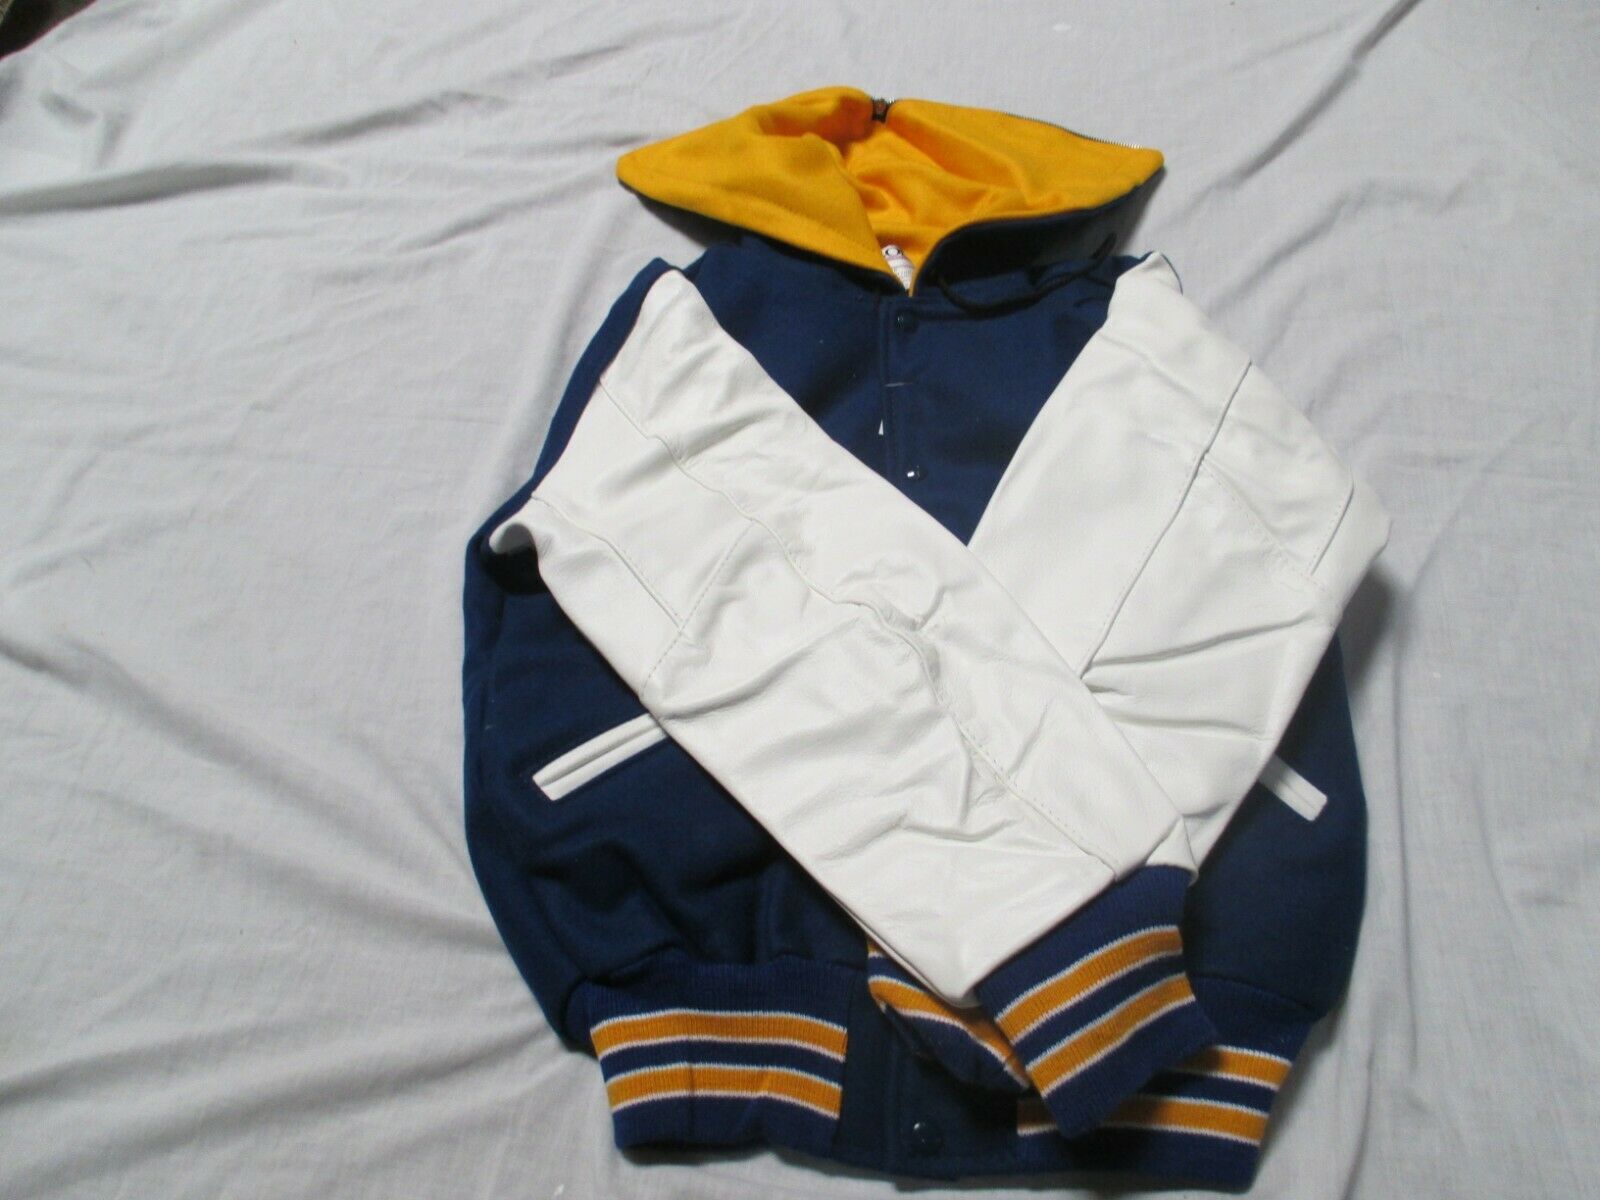 DELONG ADLT CHEERLEADER JACKET ROYAL/WHT QUILT LINED WITH GOLD  INSIDE ZIP  HOOD